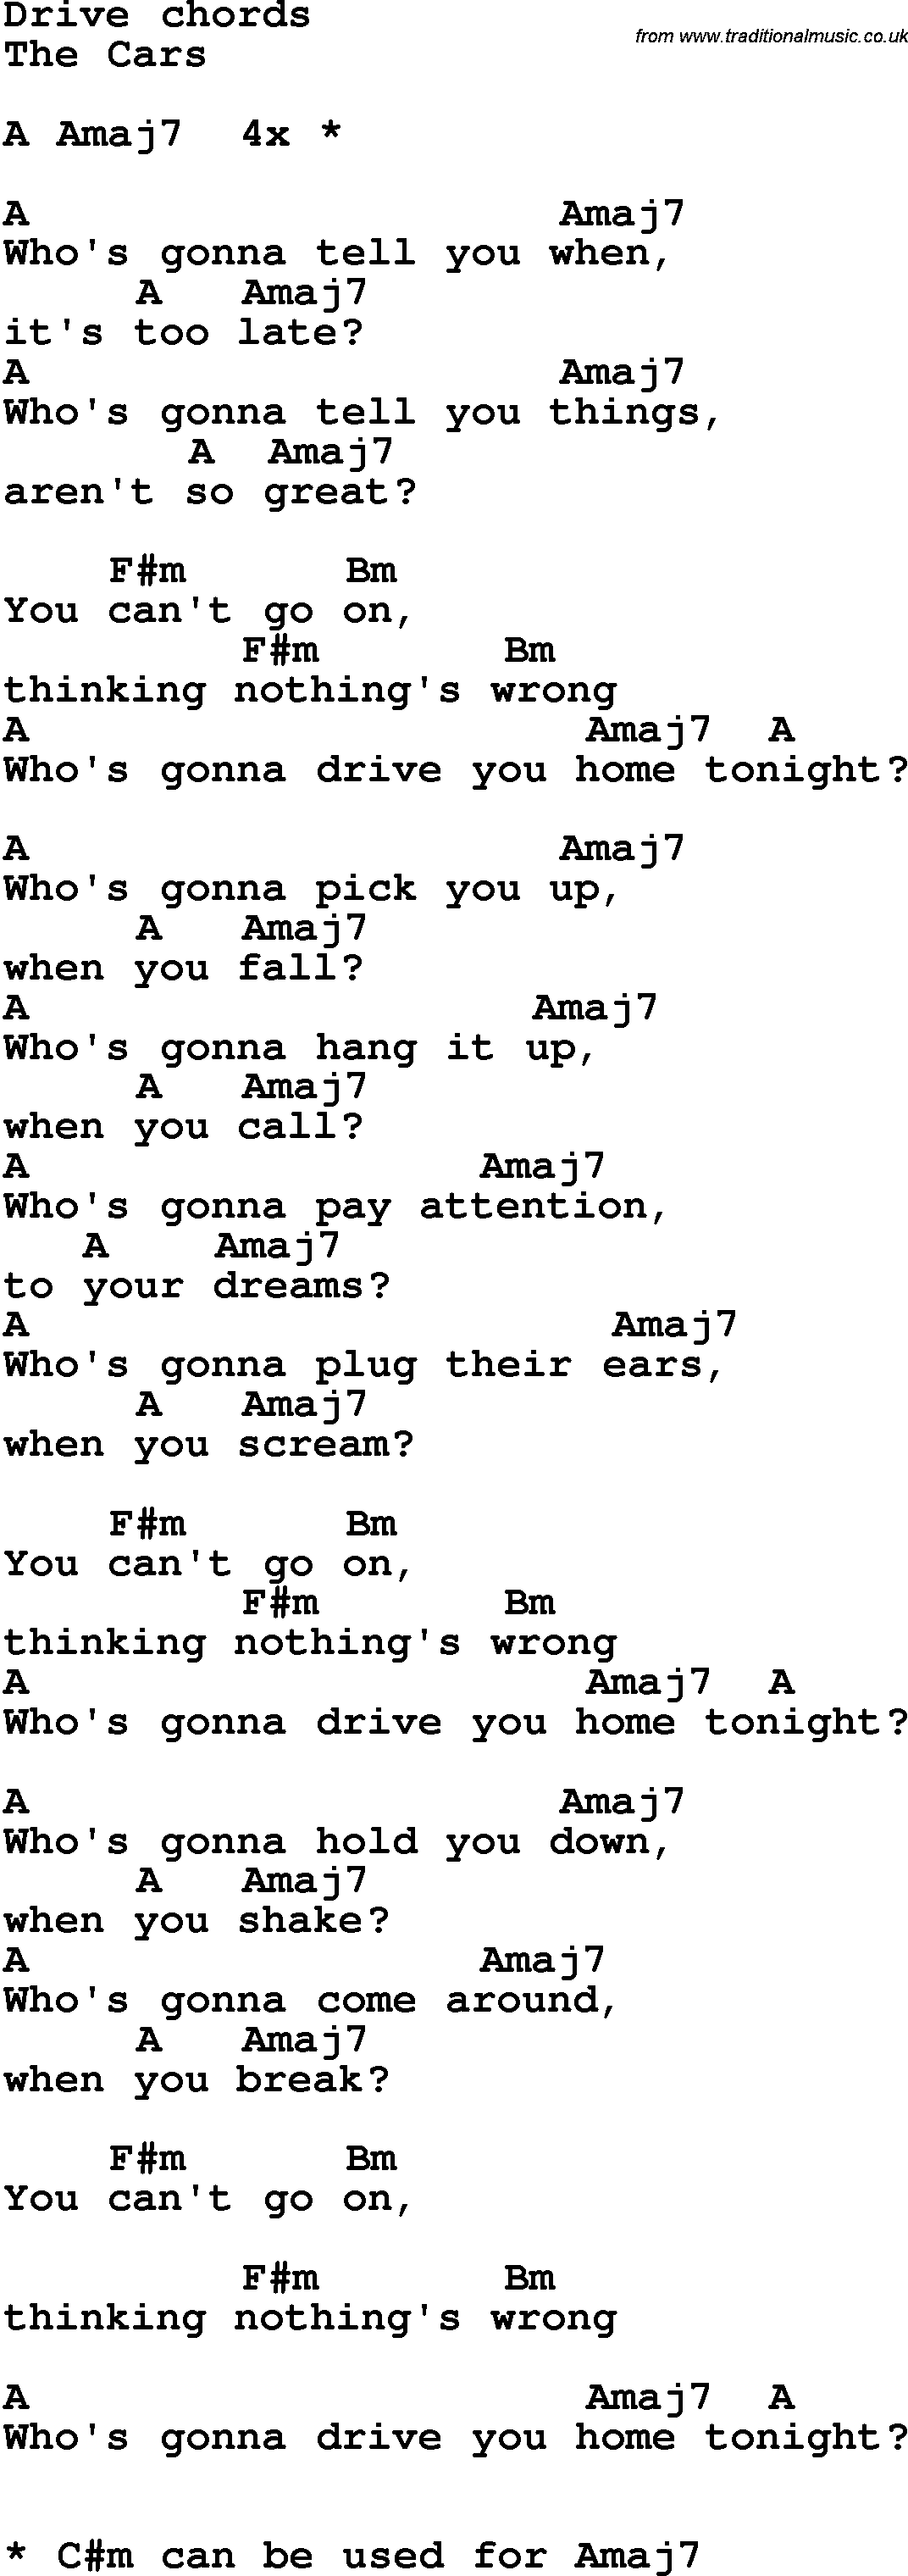 Song Lyrics with guitar chords for Drive - The Cars